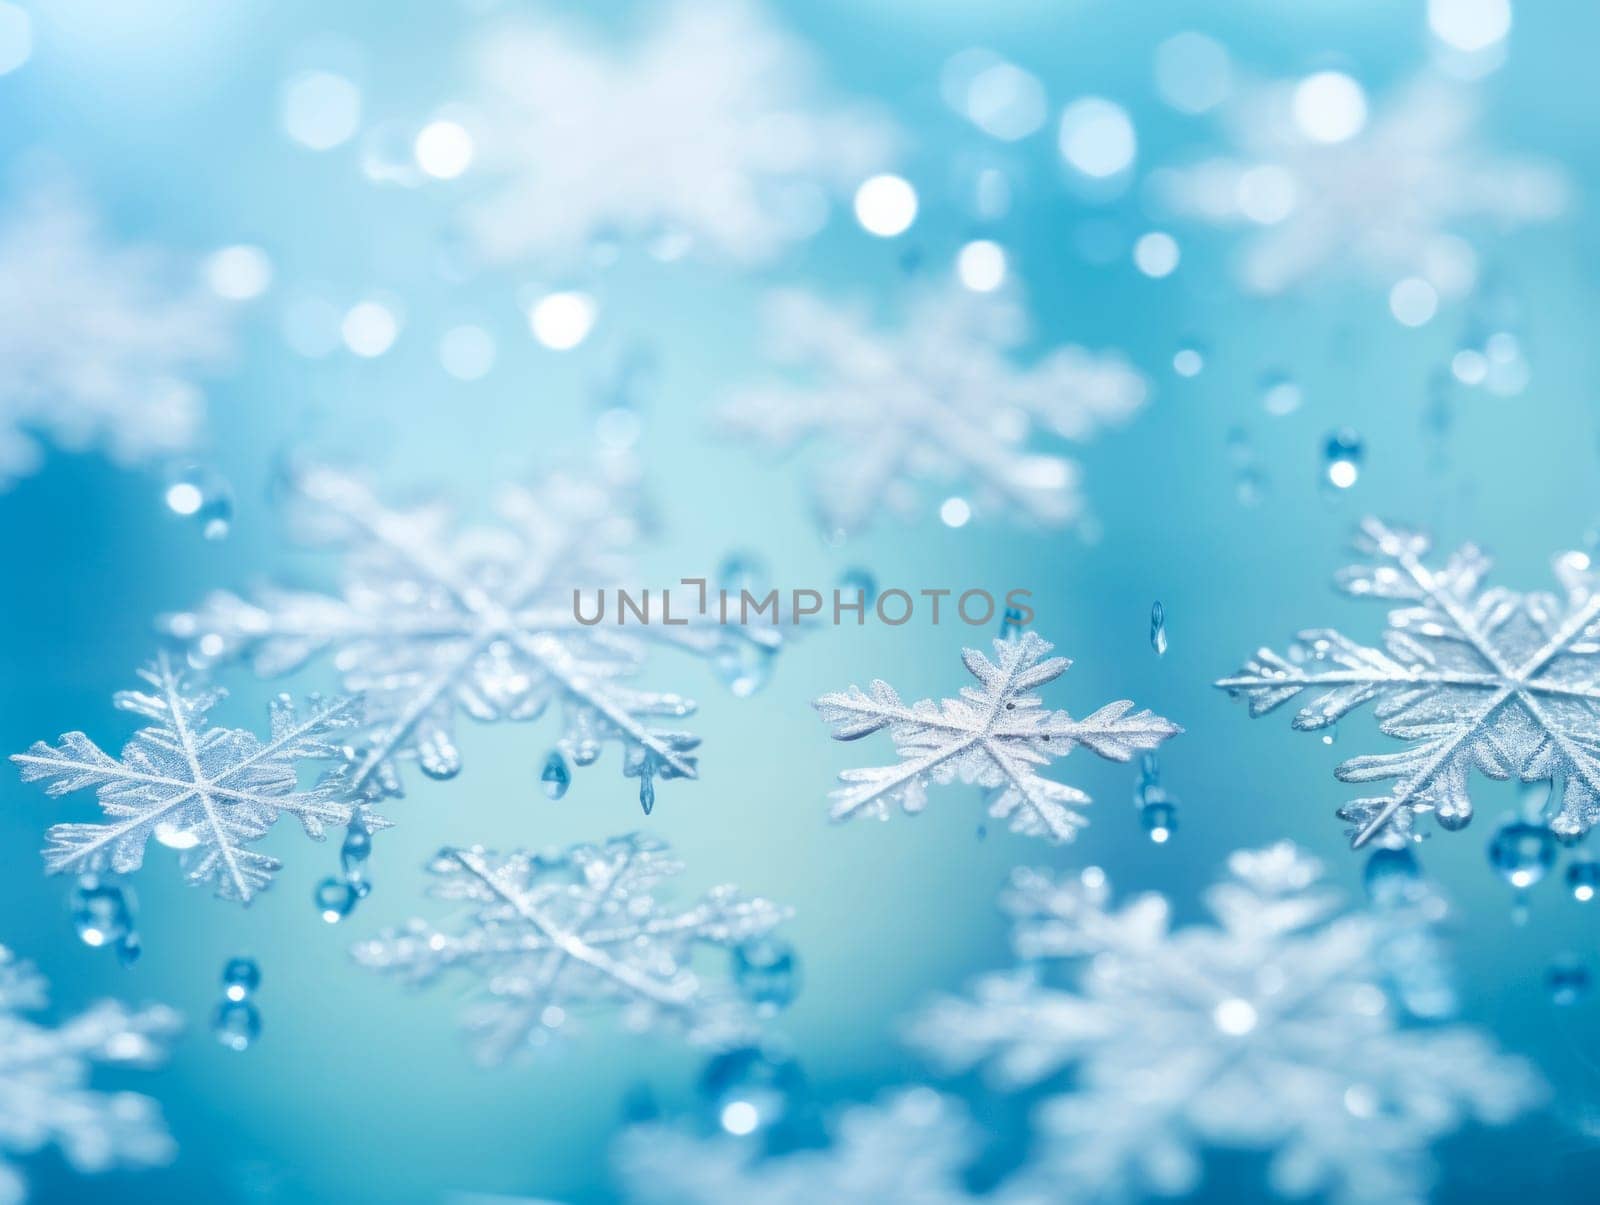 Background of snowflakes in blur.